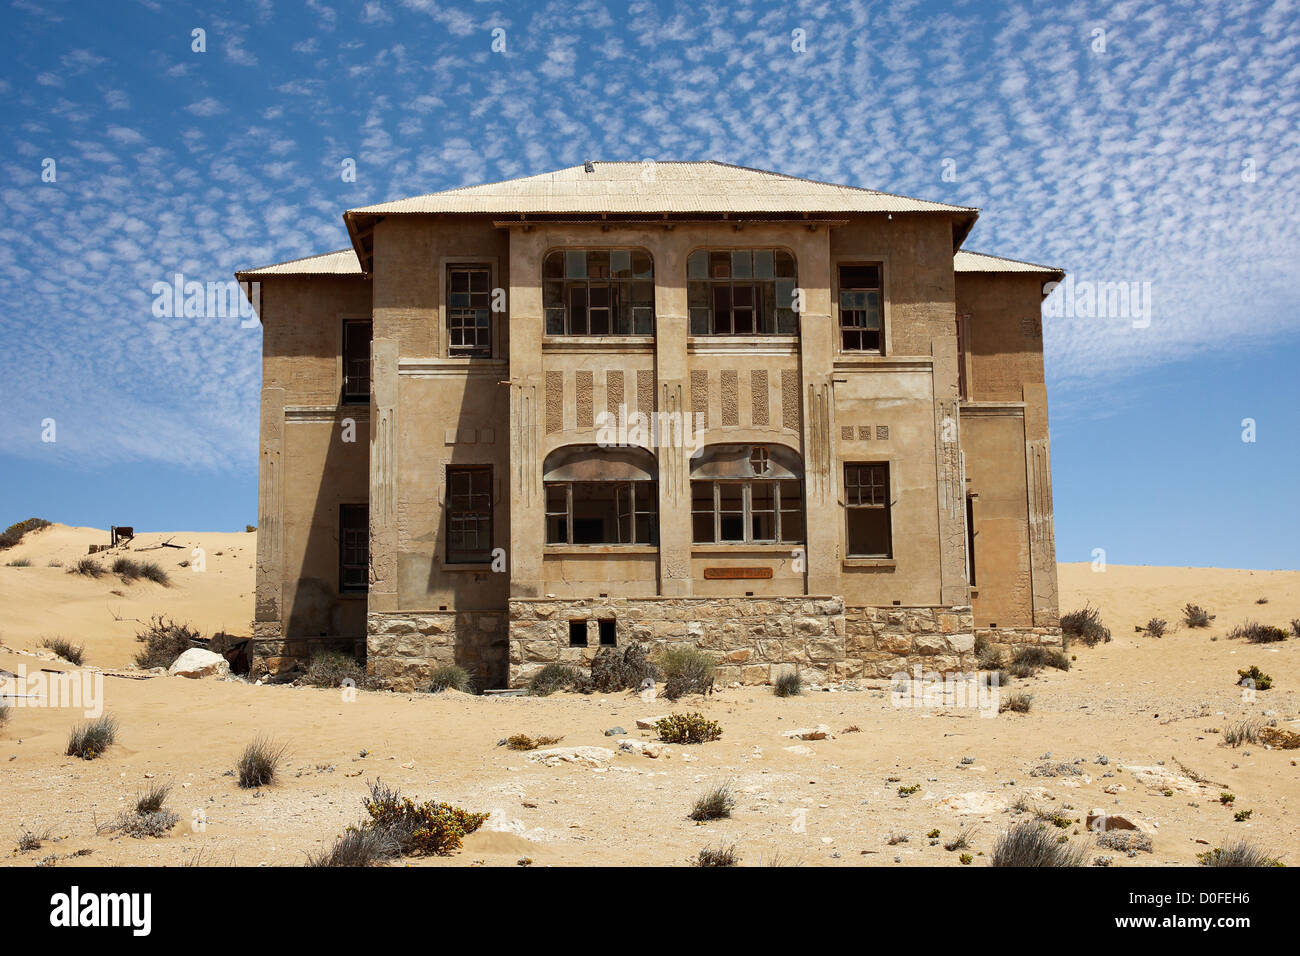 Abandoned house of the colony 'Kolmanskop' in Namibia Stock Photo